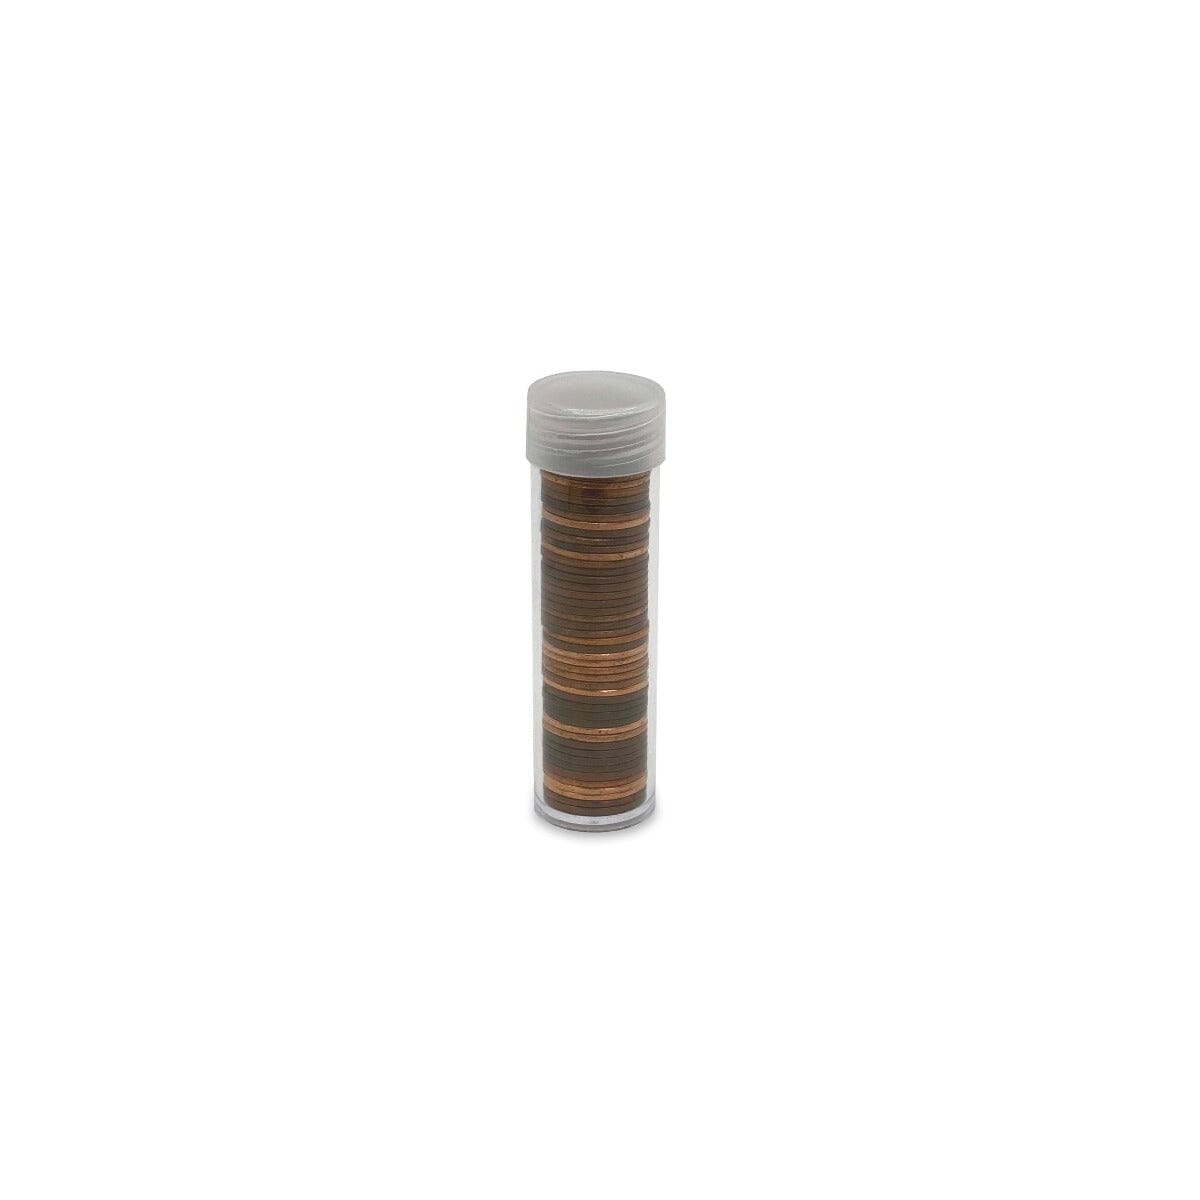 Plastic Coin Tubes - 7 Sizes Available